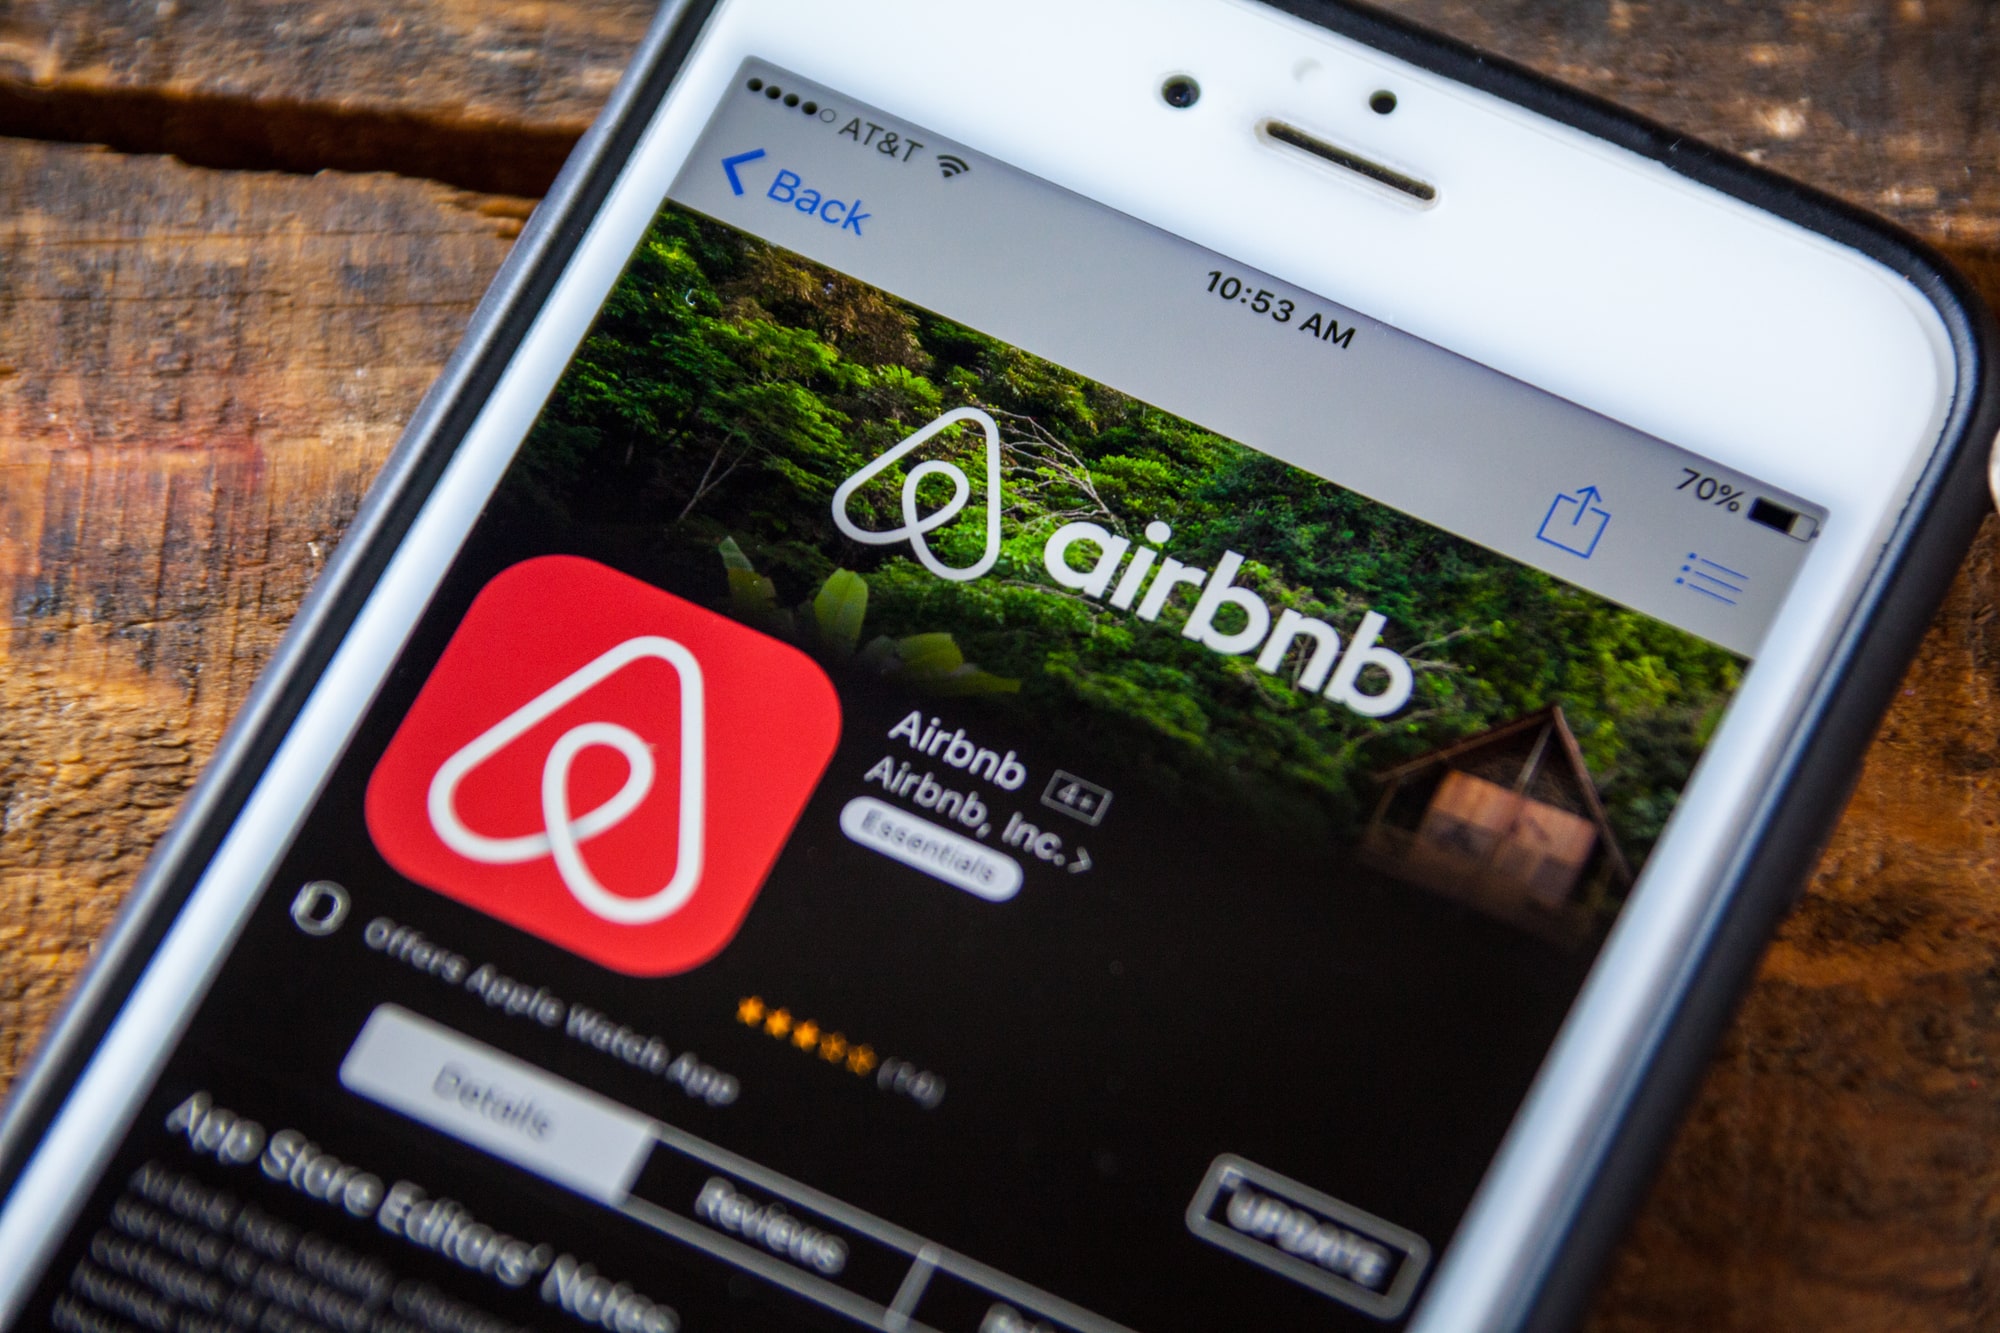 Binance-backed travel company launches a decentralized Airbnb competitor